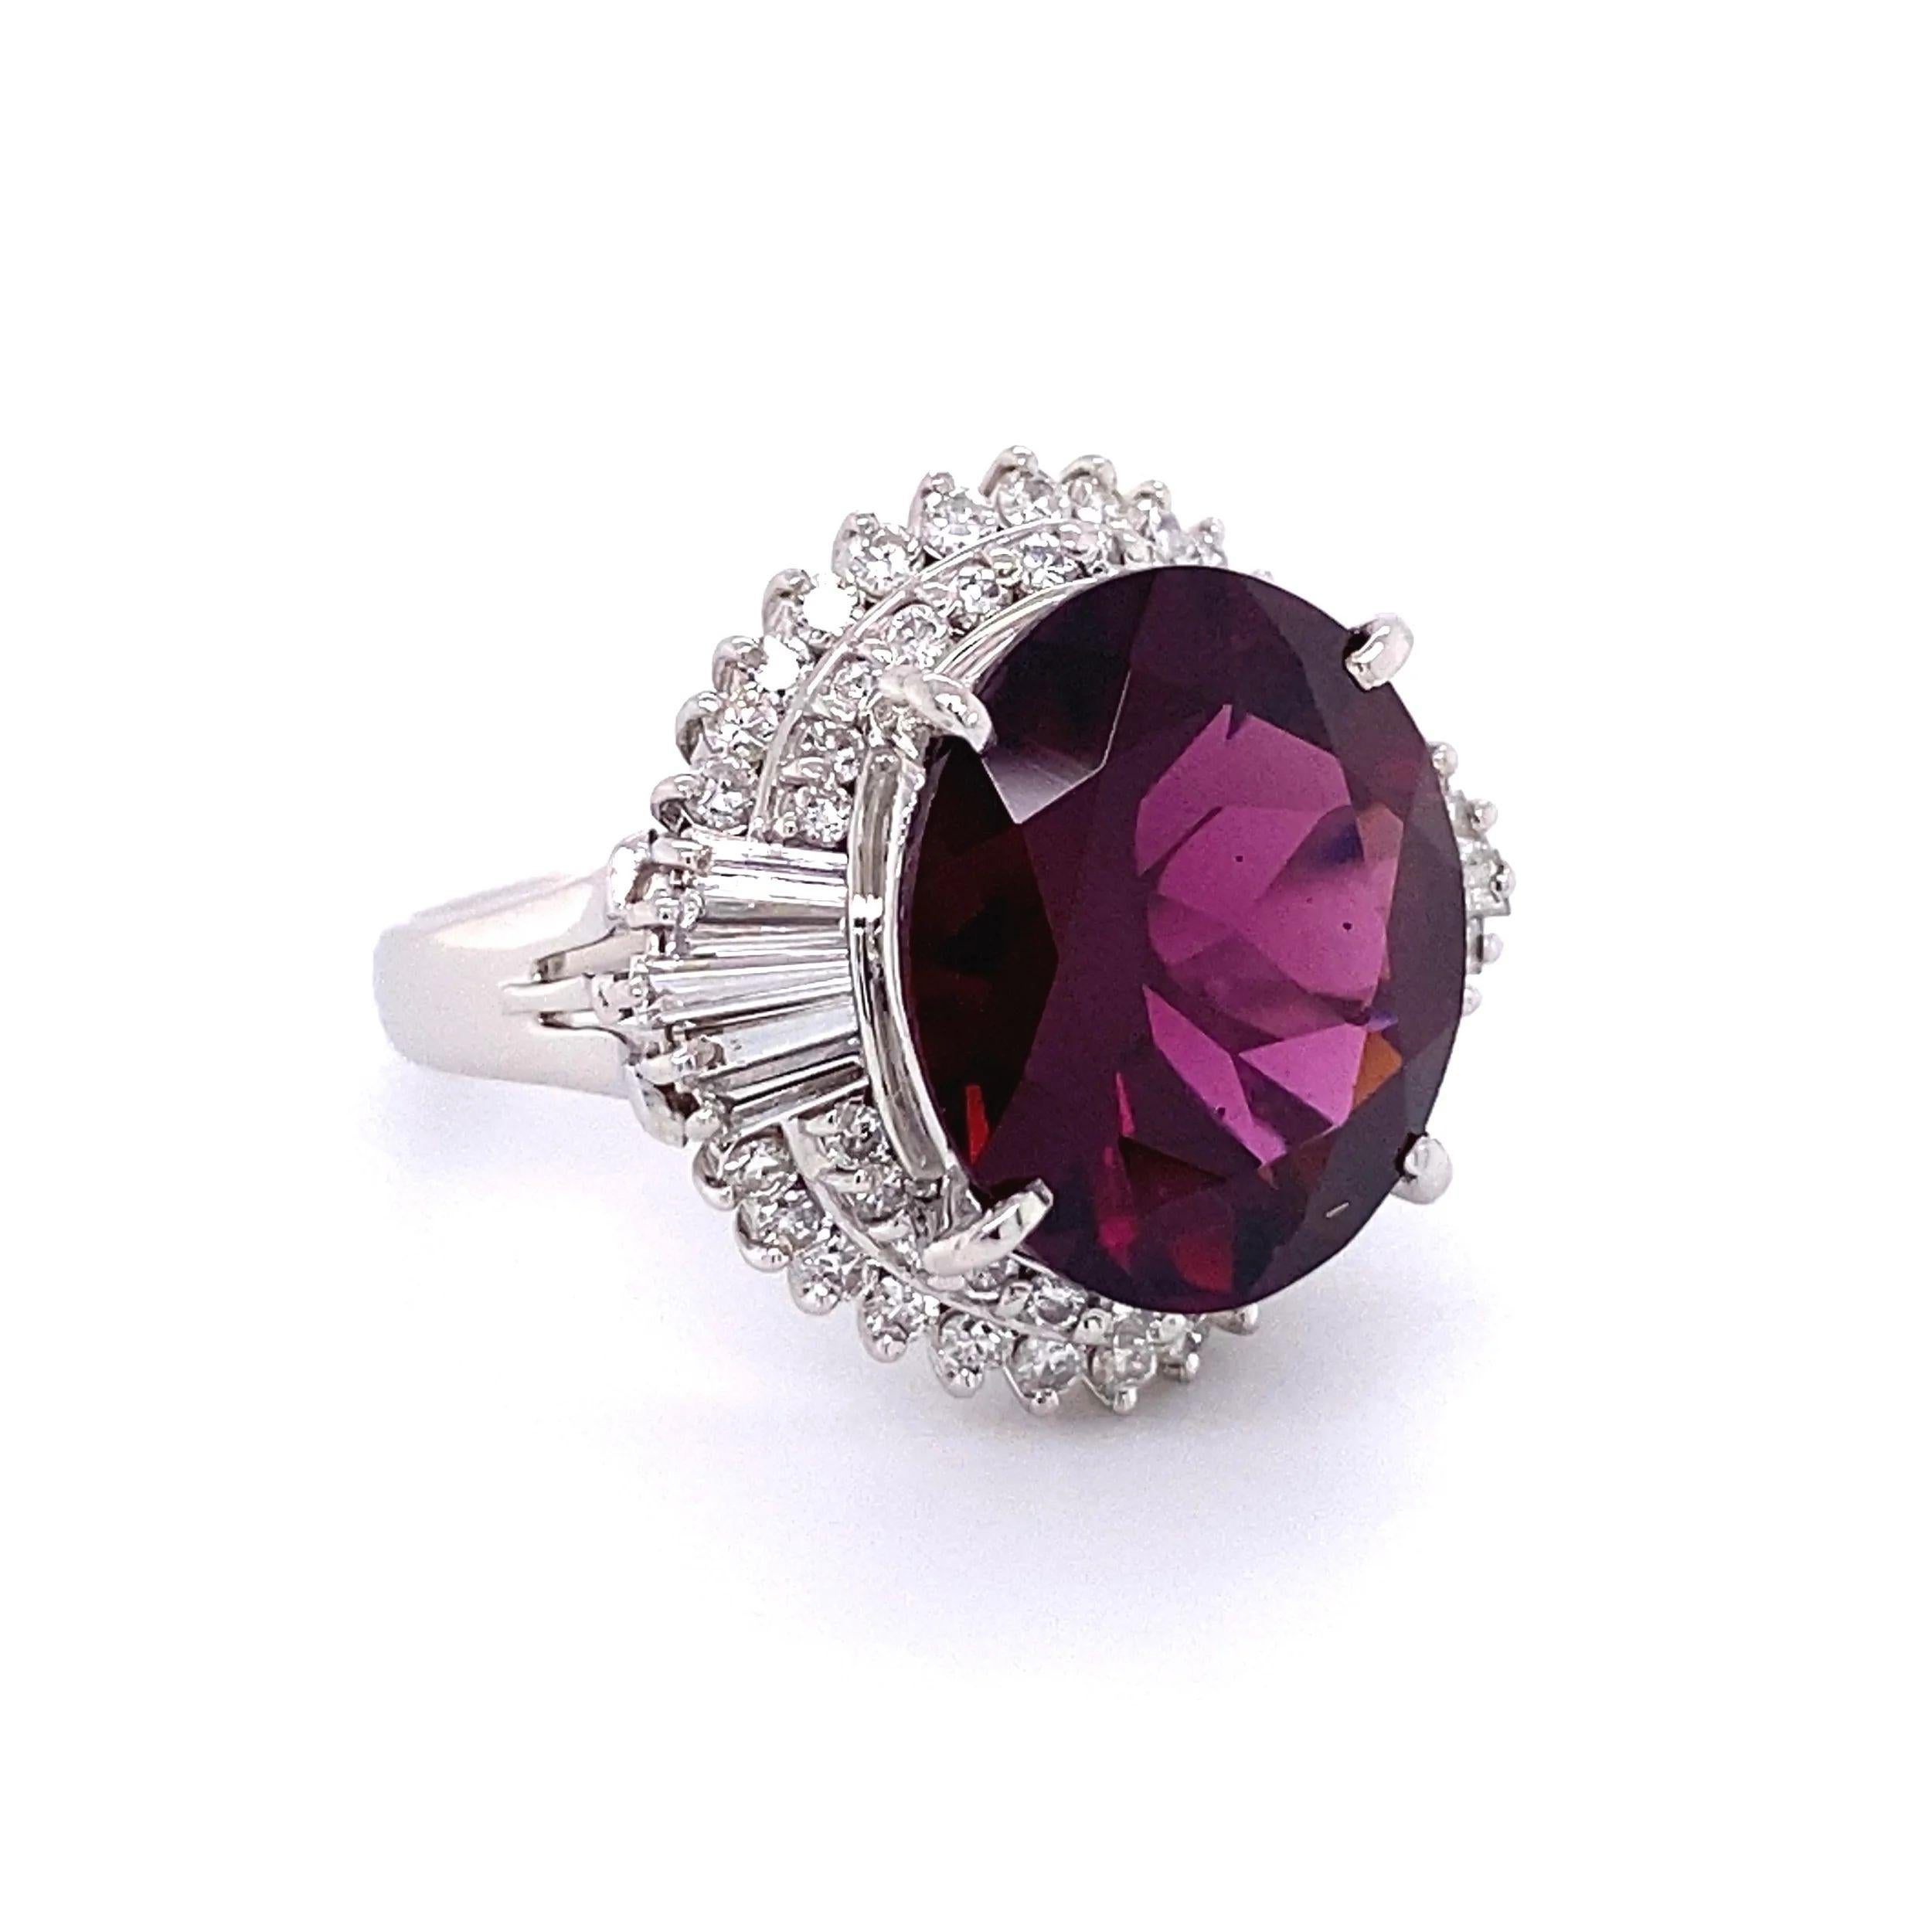 Simply Beautiful! Finely detailed Rhodolite Garnet and Diamond Platinum Vintage Cocktail Ring. Centering a securely nestled Hand set Rhodolite Garnet, weighing approx. 8.76 Carat and surrounded by Diamonds, weighing approx. 0.95tcw. Ring measuring